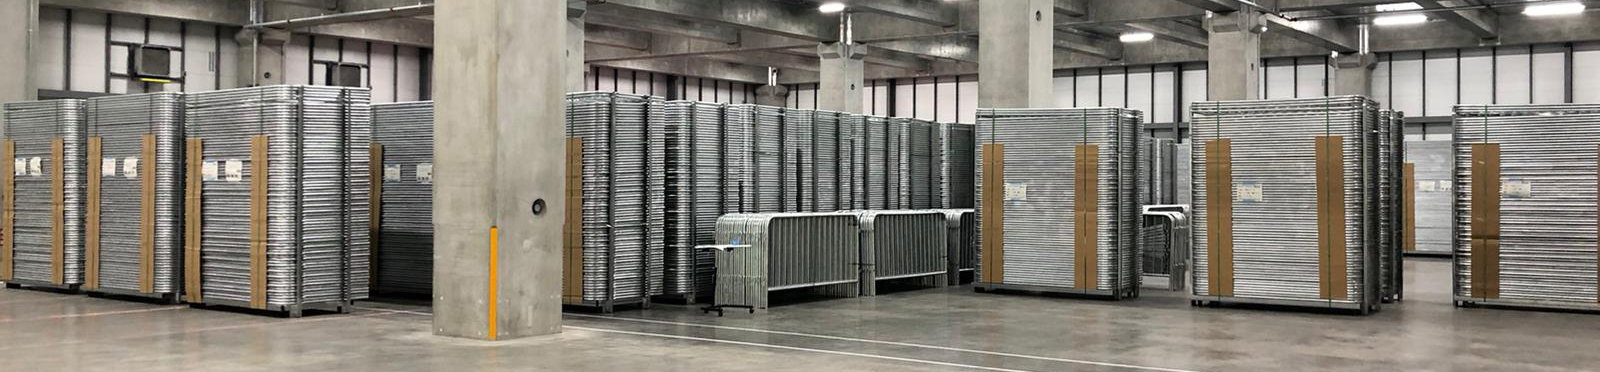 barriers stacked in the west coast warehouse